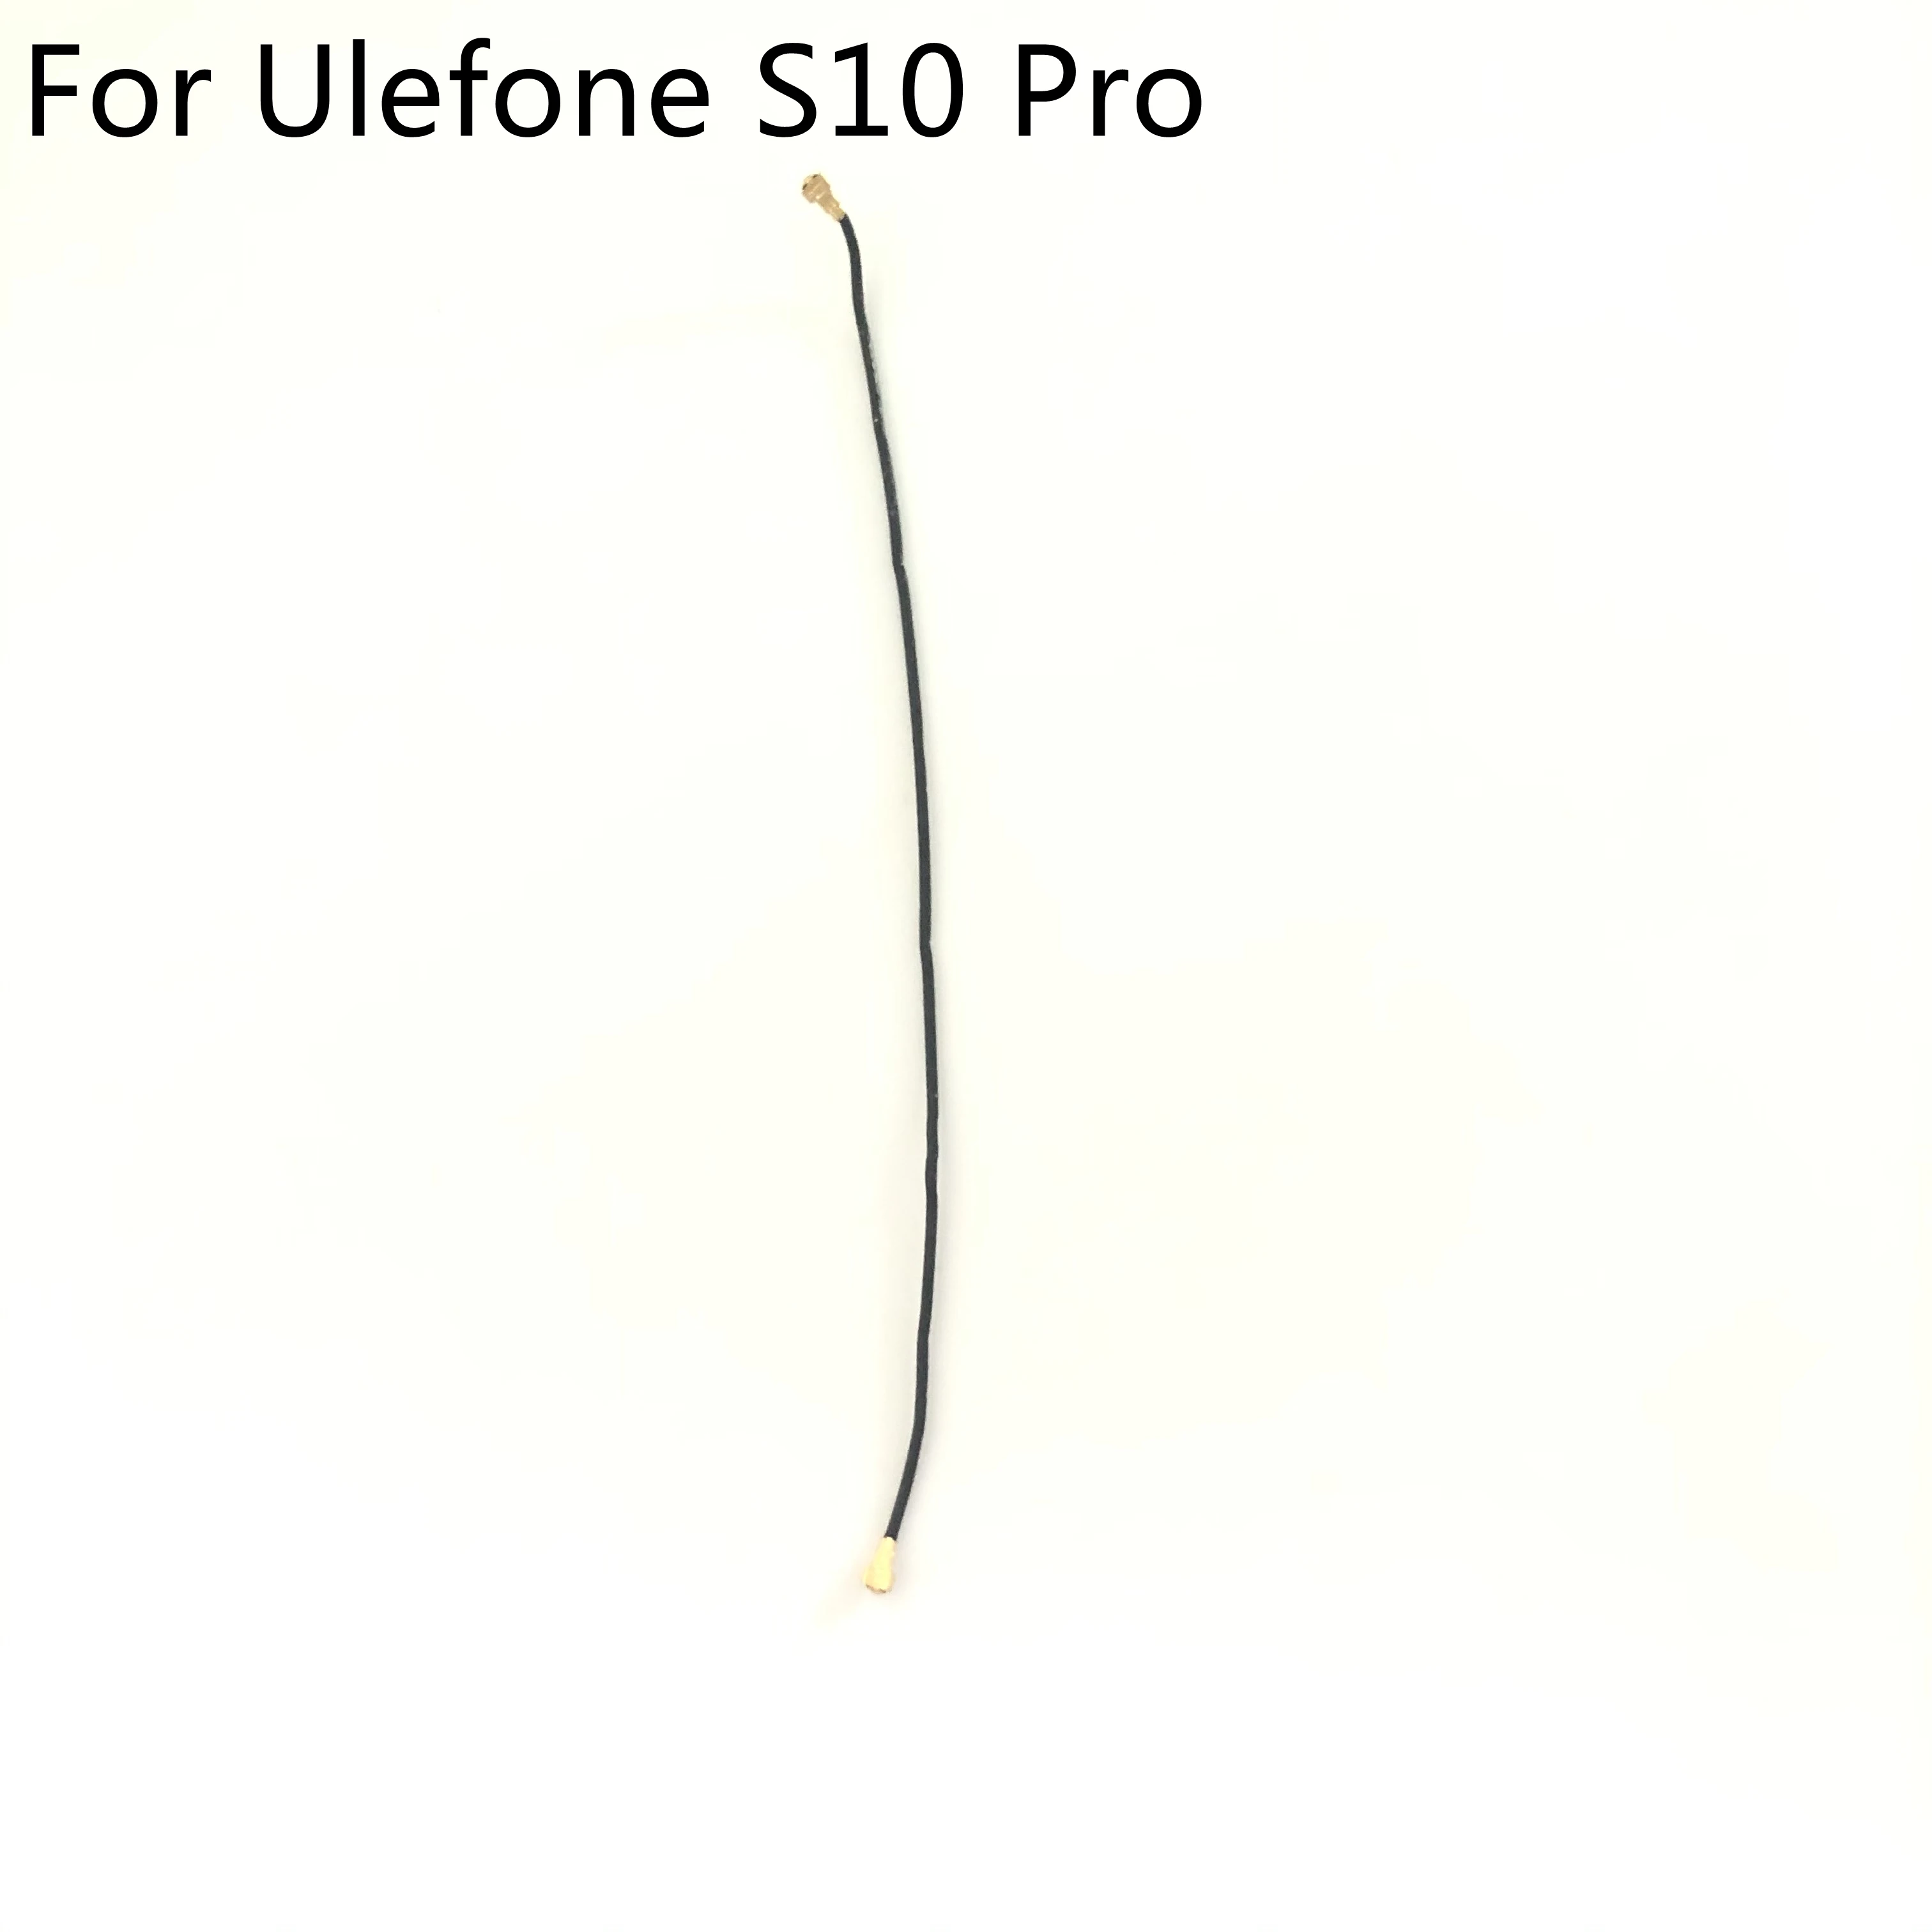 

Ulefone S10 Pro Phone Coaxial Signal Cable For Ulefone S10 Pro MT6739WA 5.7" 720*1498 Smartphone